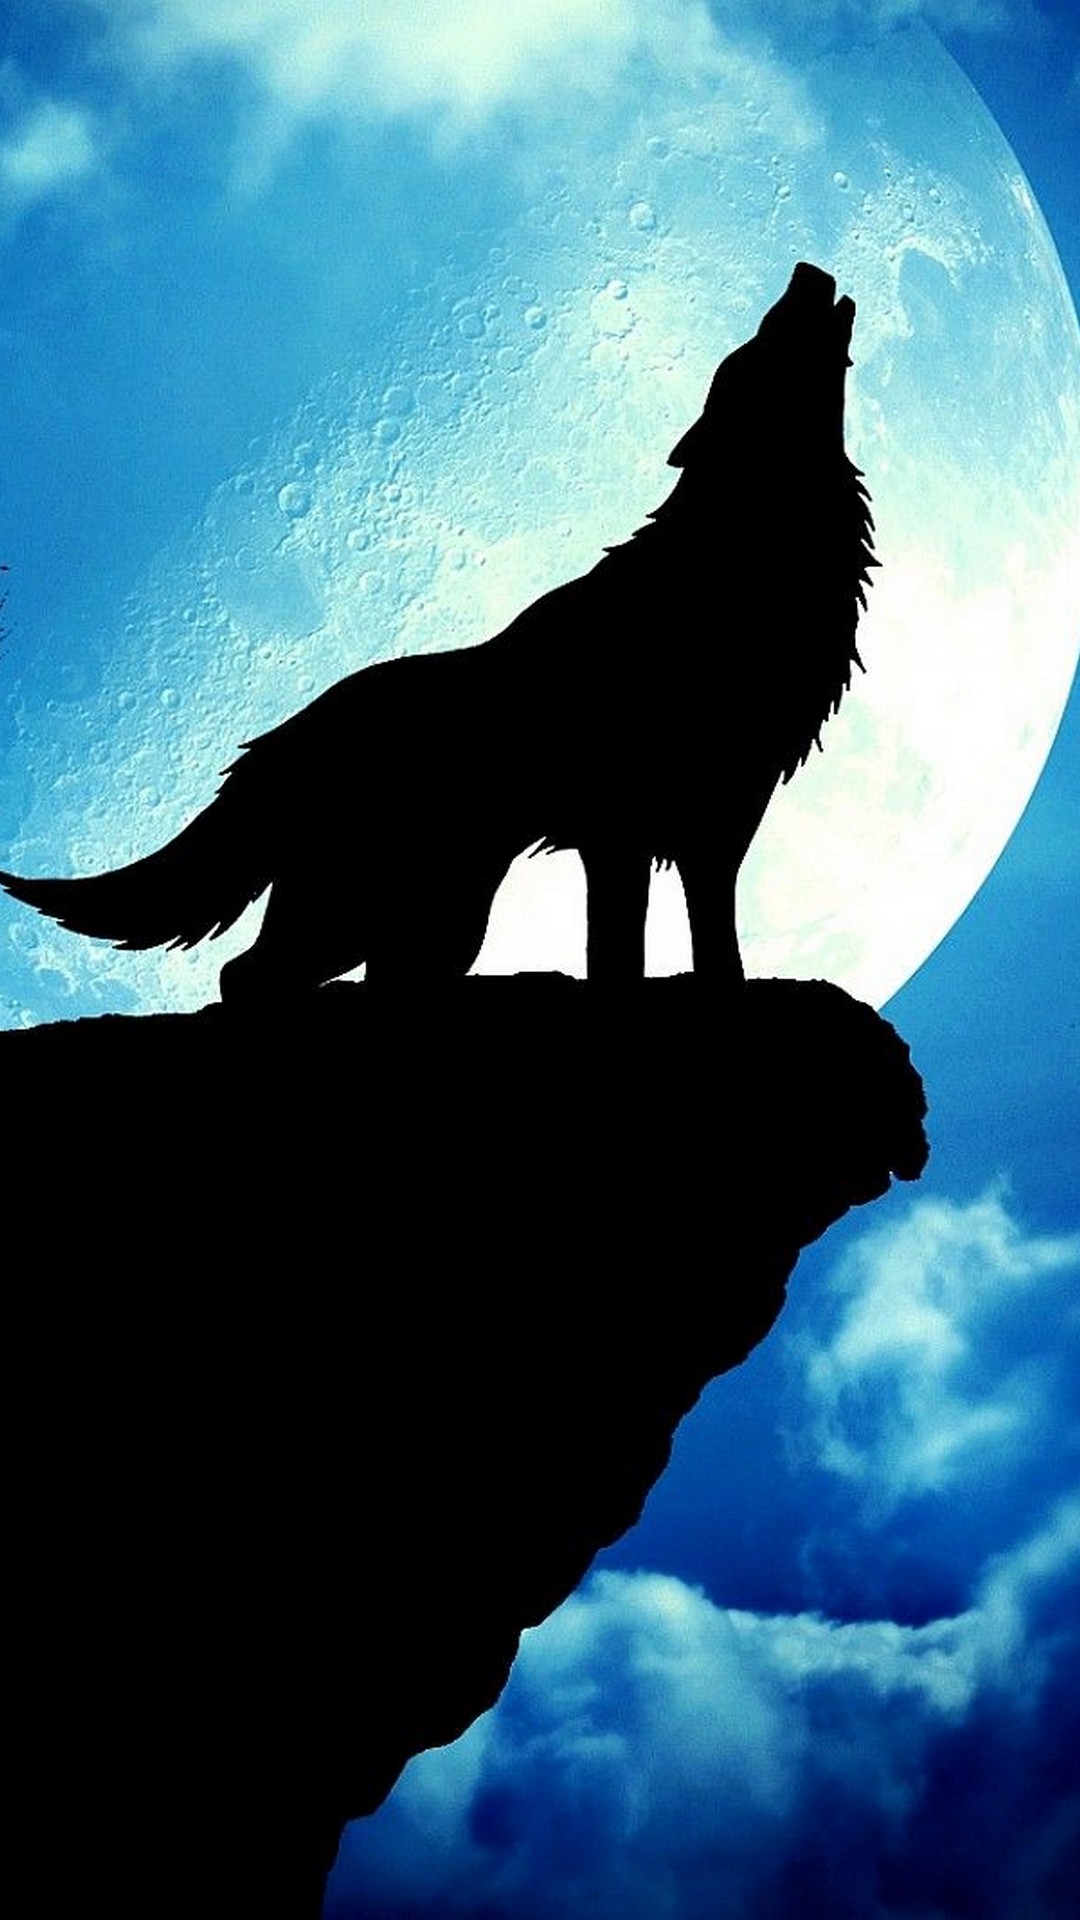 Cool Wolf iPhone Wallpaper Tumblr with high-resolution 1080x1920 pixel. You can set as wallpaper for Apple iPhone X, XS Max, XR, 8, 7, 6, SE, iPad. Enjoy and share your favorite HD wallpapers and background images